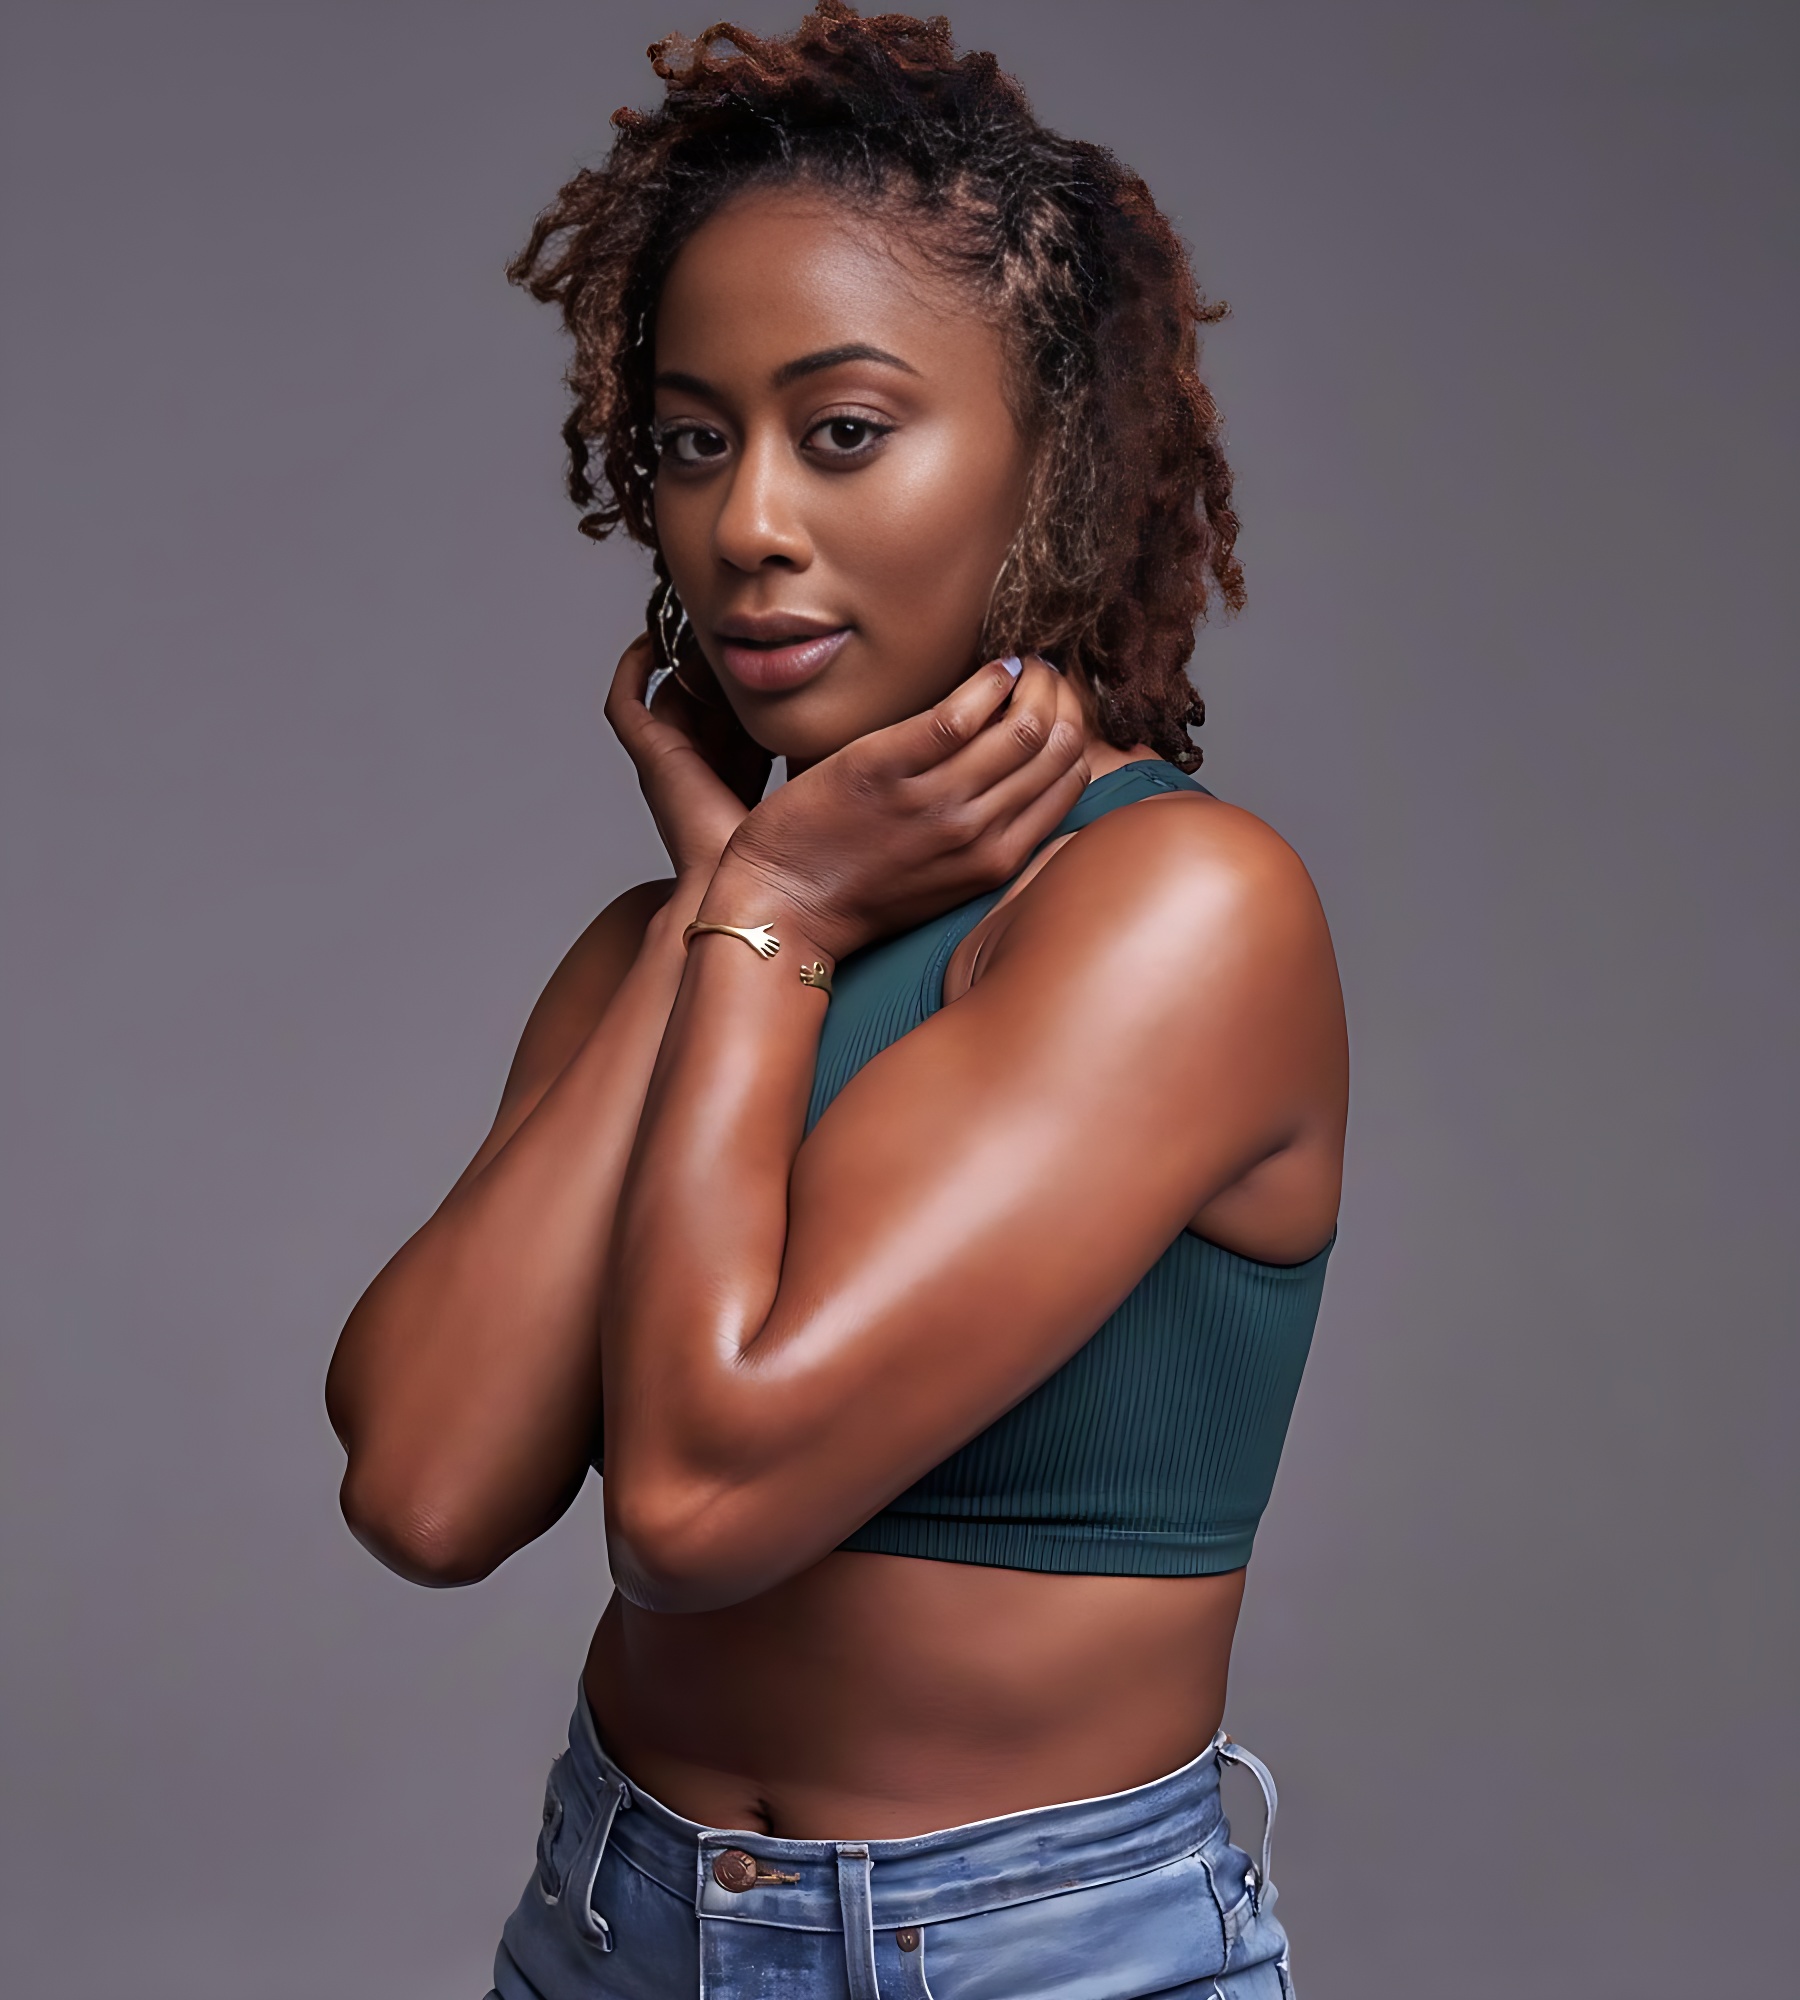 Zuri Adele (Actress) Age, Wiki, Boyfriend, Height, Weight, Movies, TV Shows, Parents, Career and More